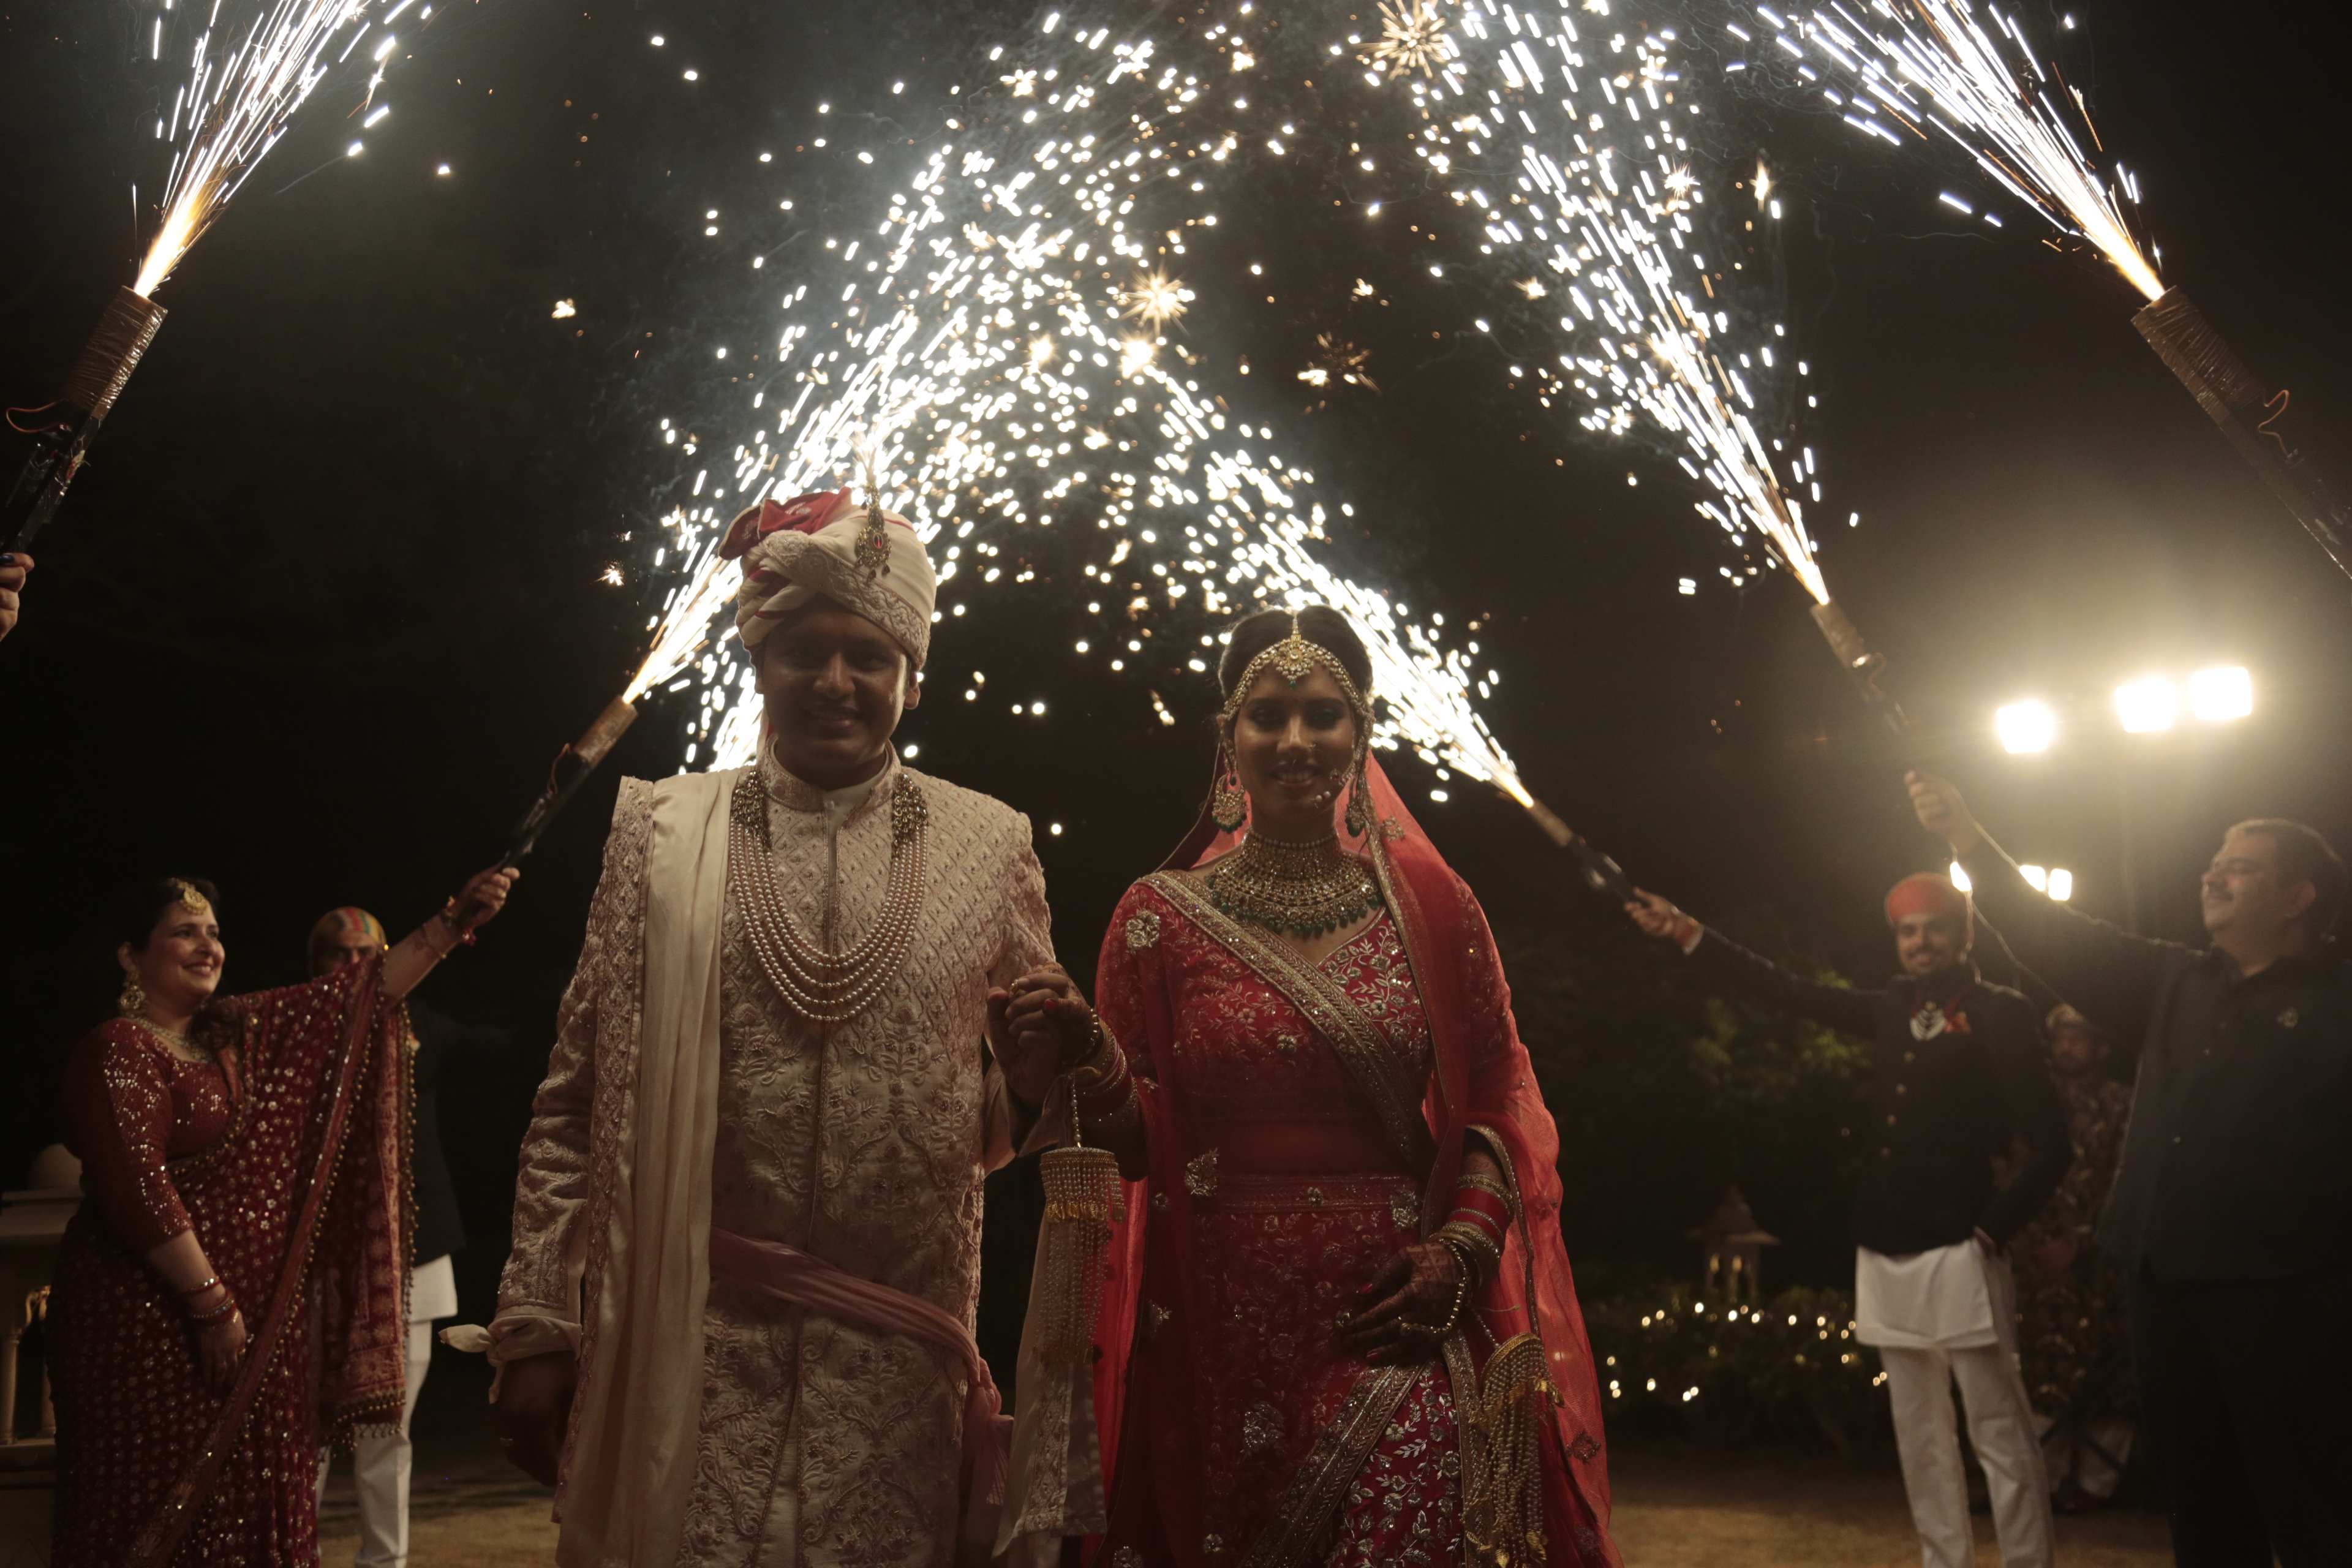 This Doctor-Duo’s Wedding Was As Magical As Their Love Story!